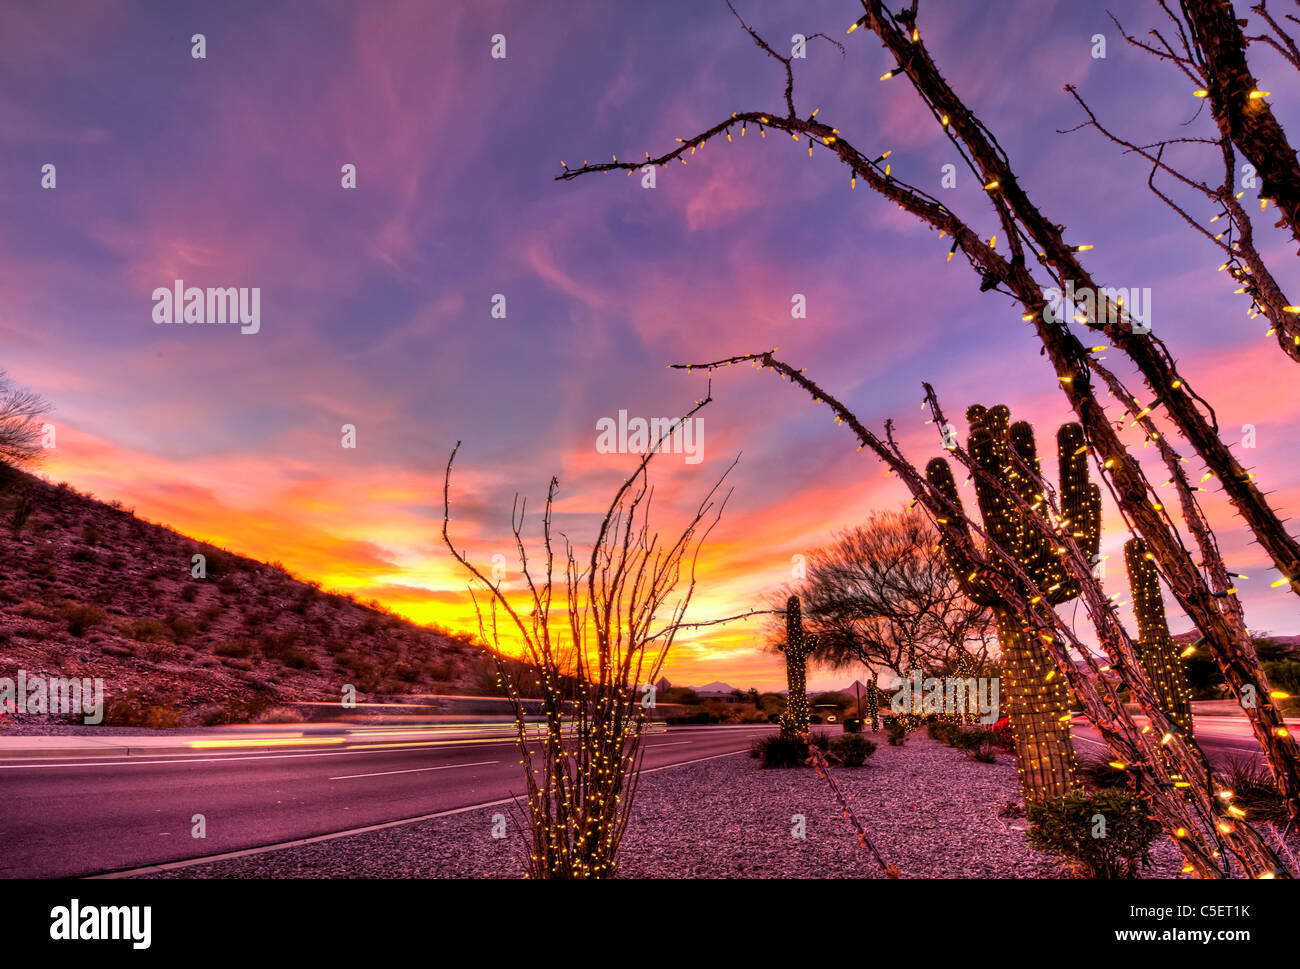 These huge Saguaro Cactus have been covered in Christmas lights for the Christmas season in Phoenix, AZ Stock Photo